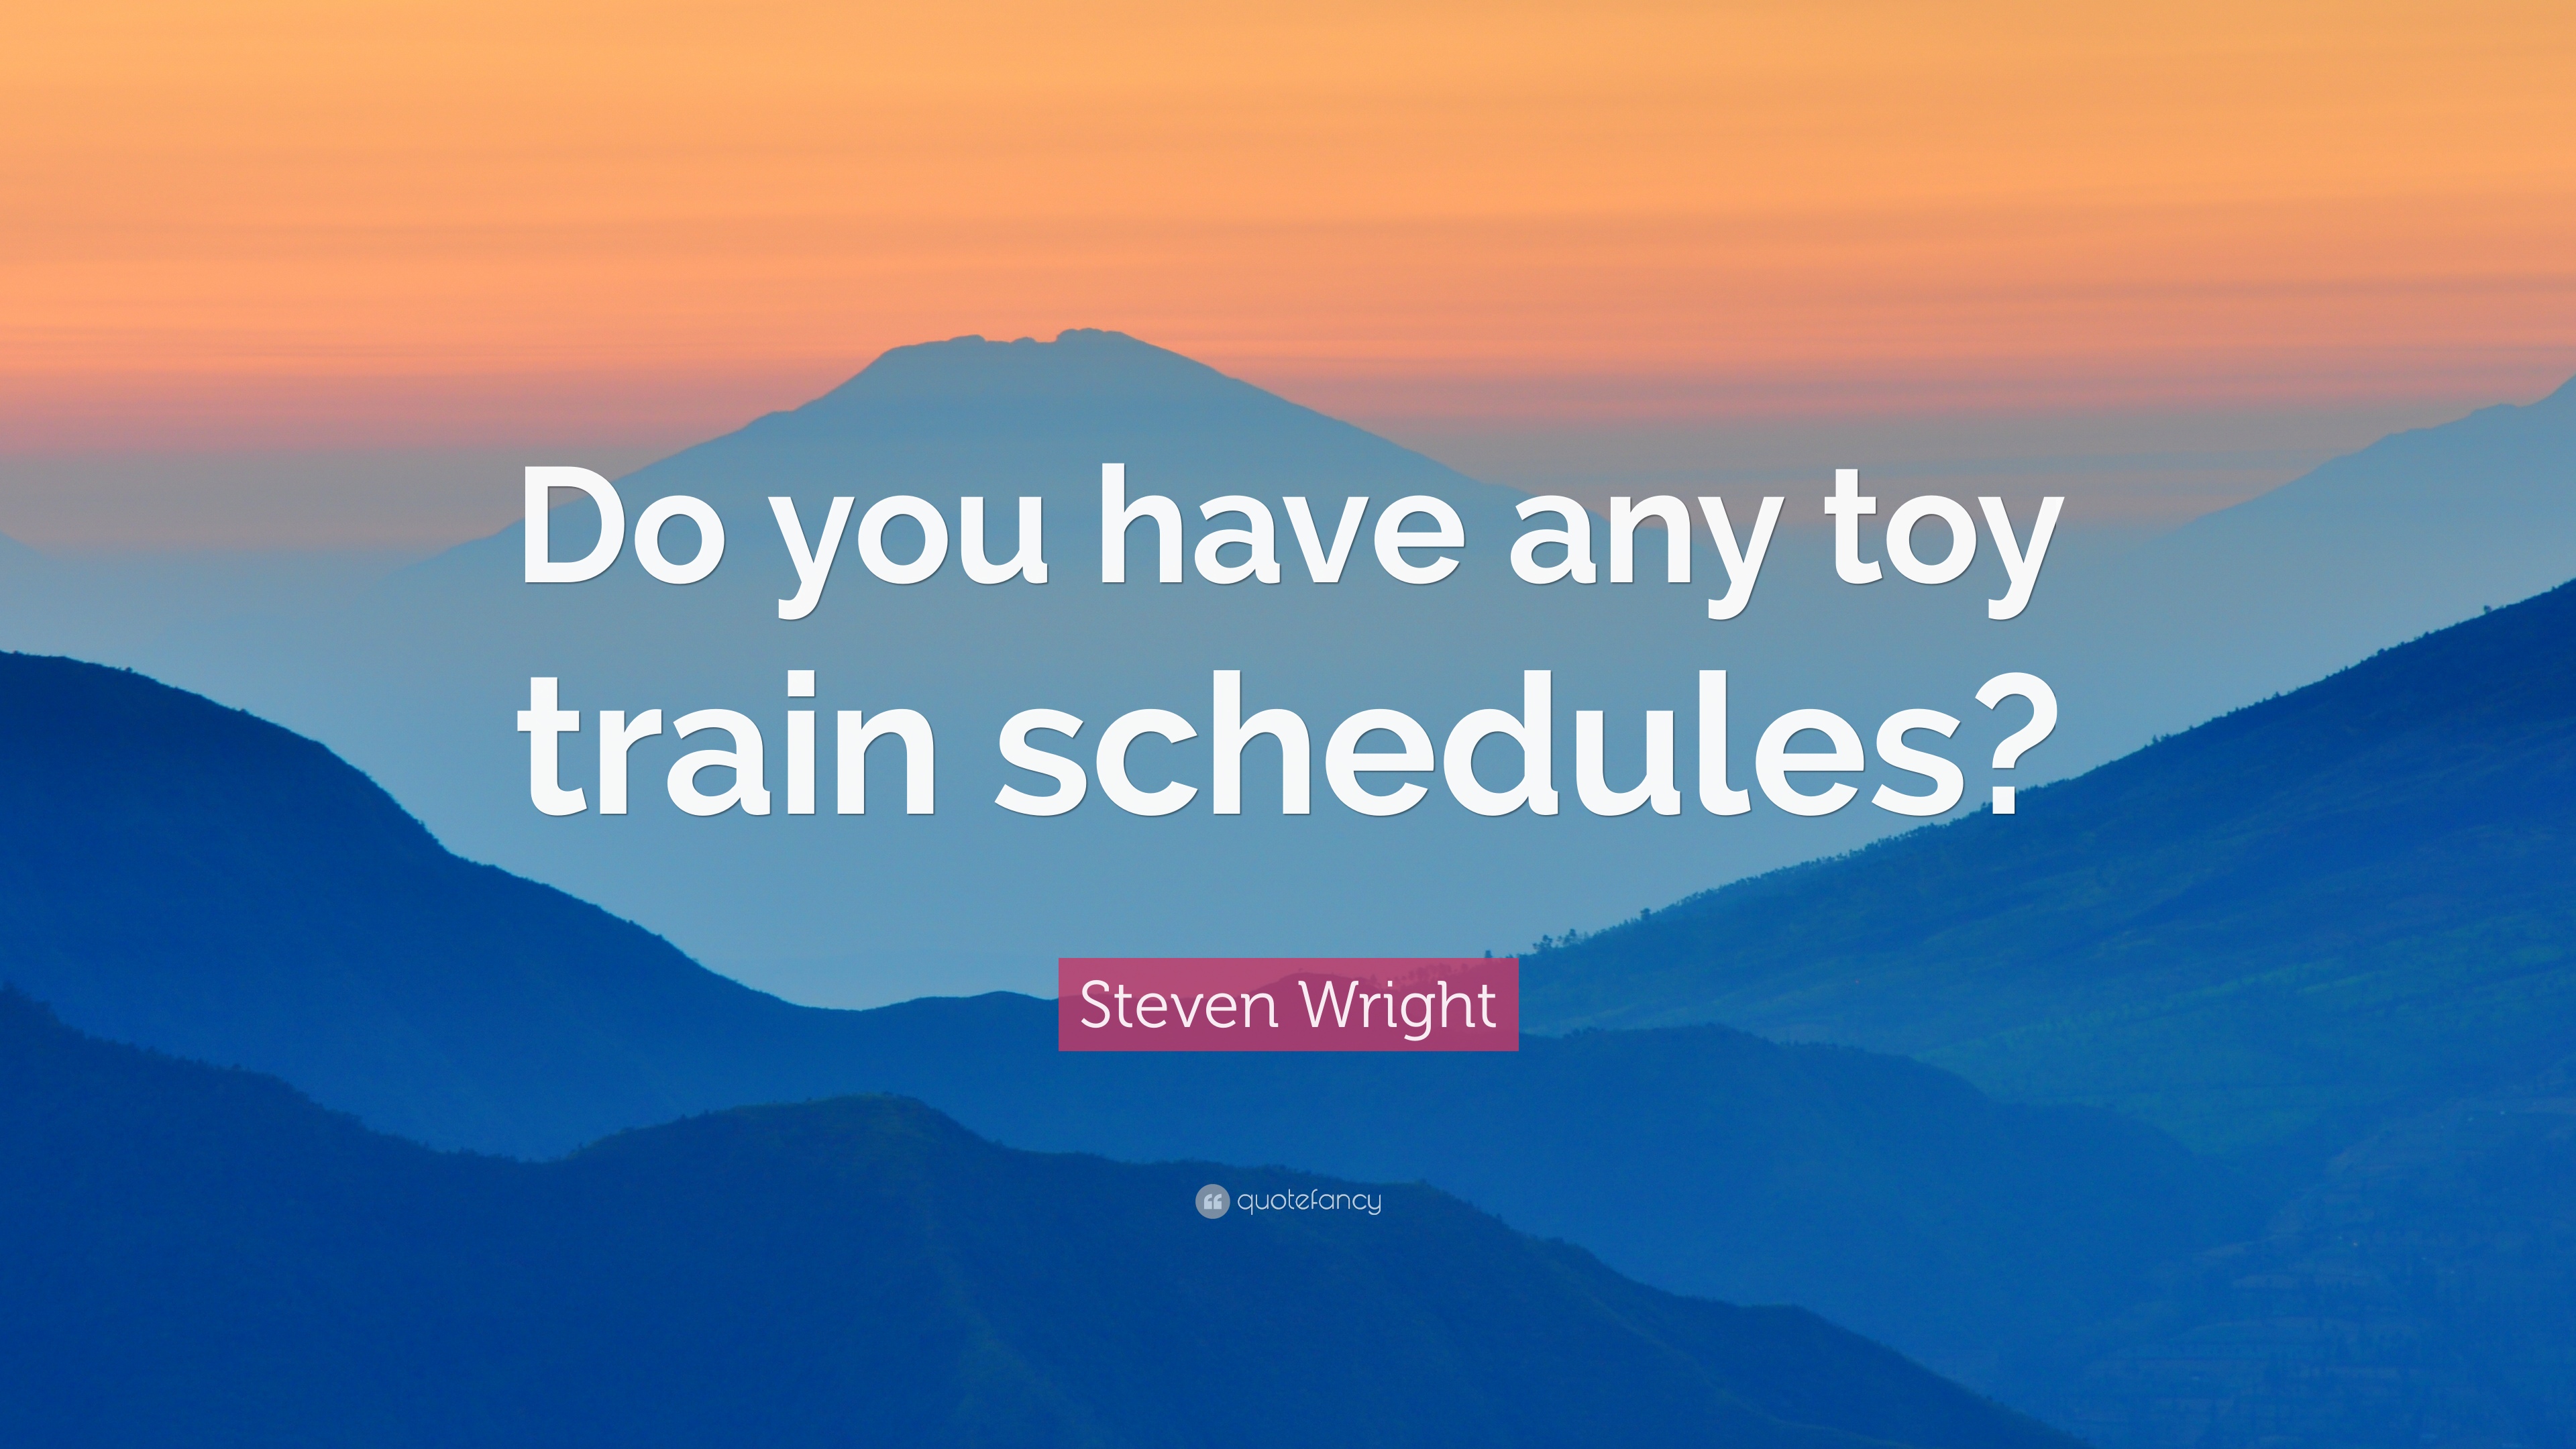 do you have any toy train schedules. steven wright